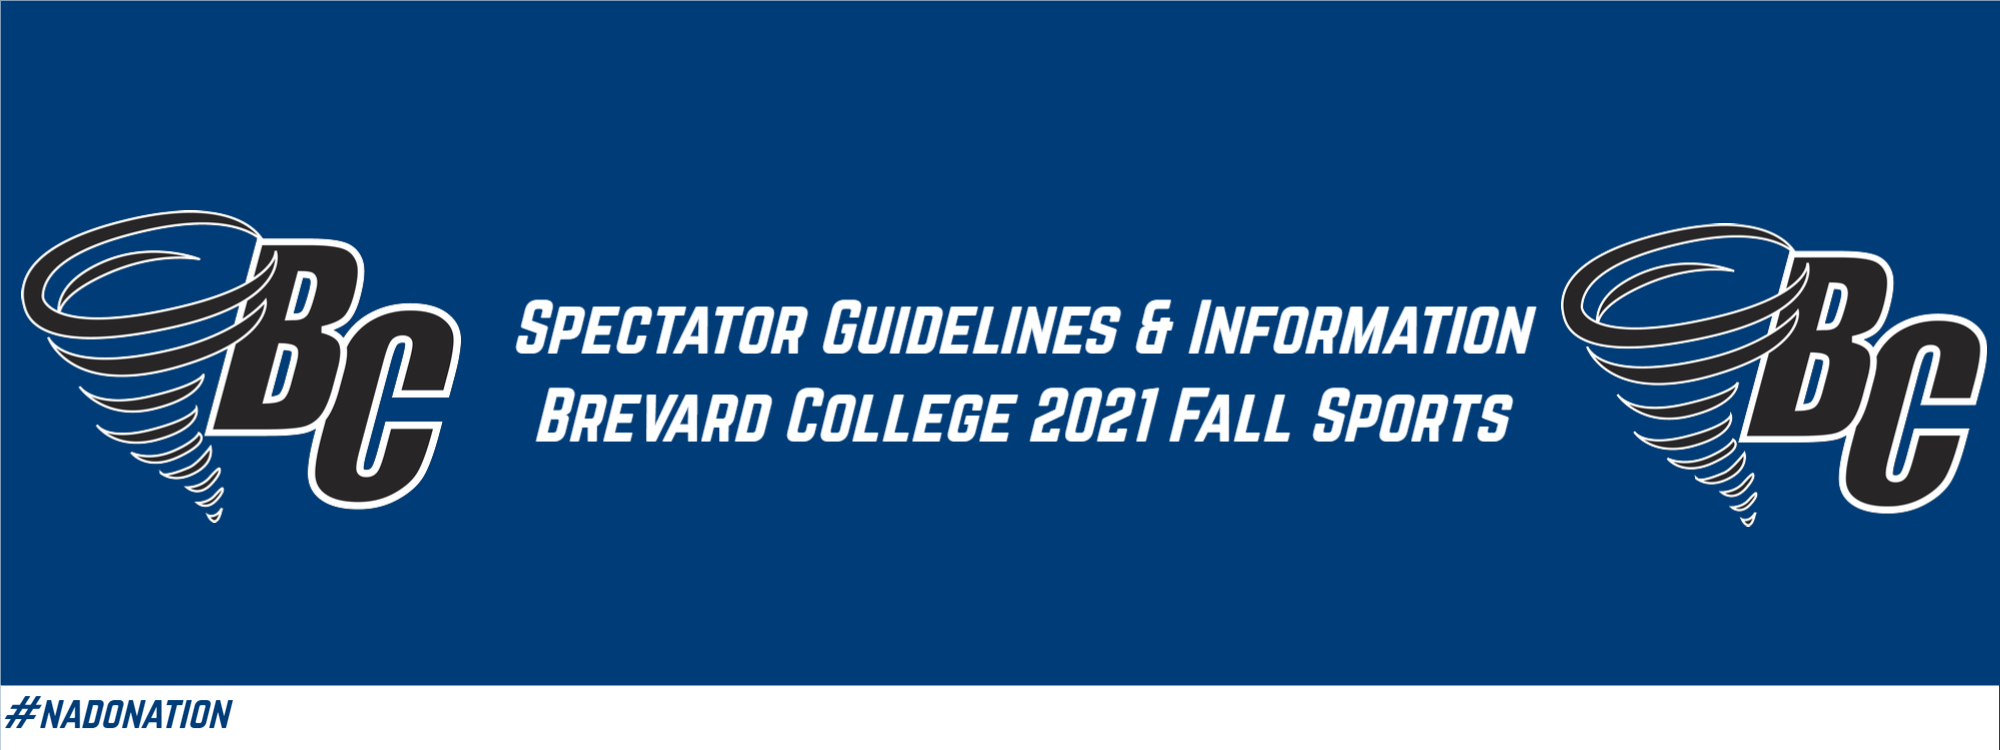 Spectator Guidelines & Parking/Ticket Info for Fall 2021 Brevard College Sports